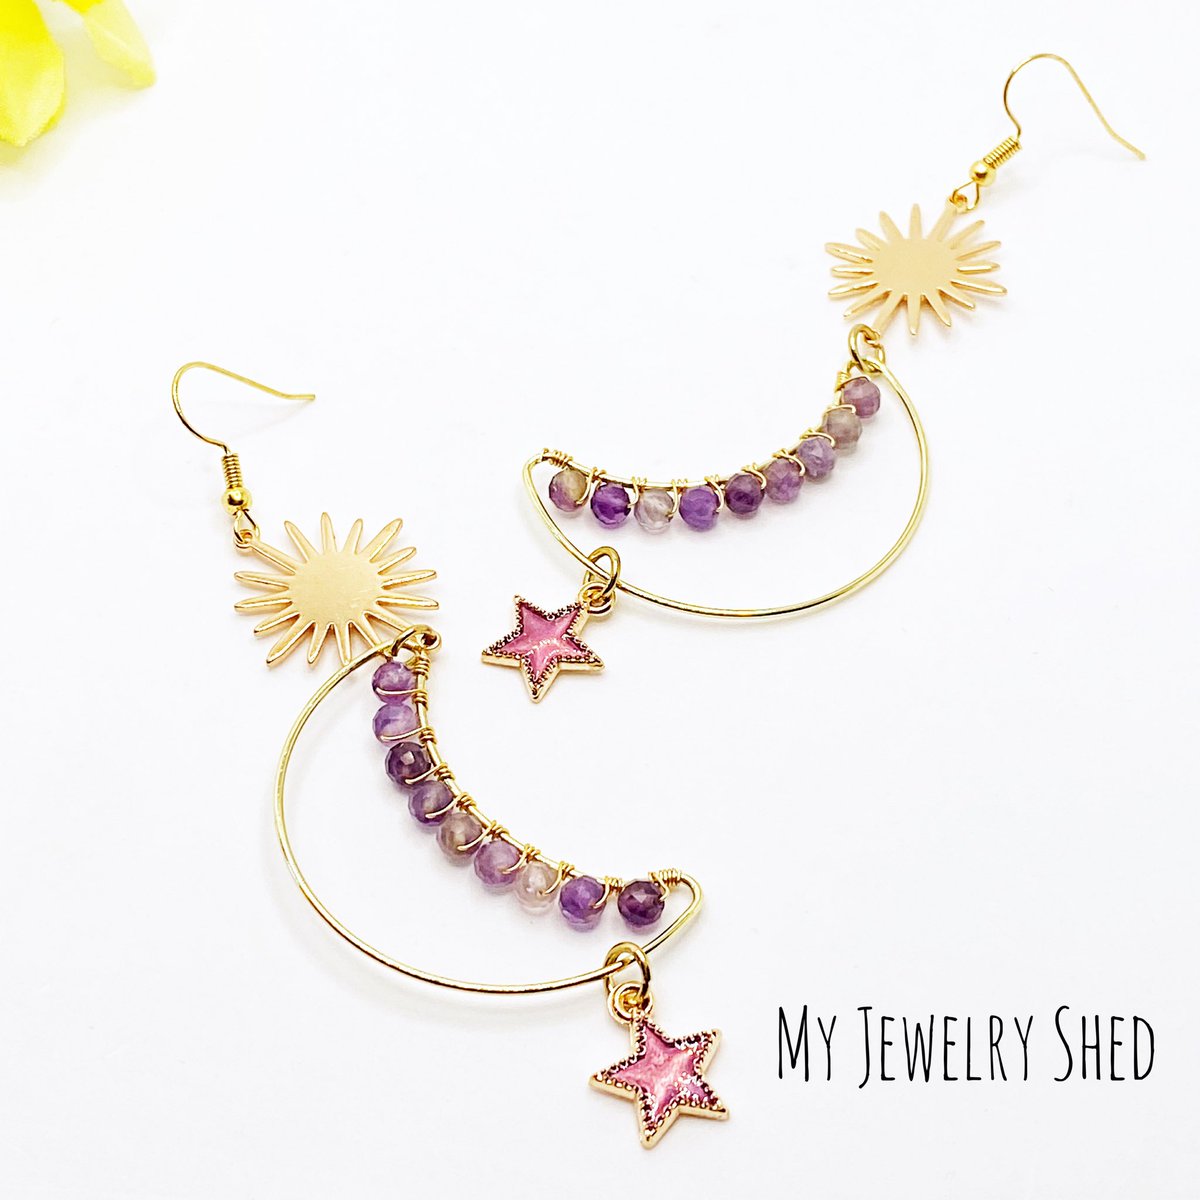 Amethyst Moon and Star Earrings are now in my shop! These are 4” long and very Boho Chic! 🌙⭐️

etsy.com/listing/129227…

#moonearrings #moonandstars #mysical #cresentmoon #celestialearrings #etsy #myjewelryshed #bohochicstyle #hippiechic #longearrings #nightsky #sunburstearrings